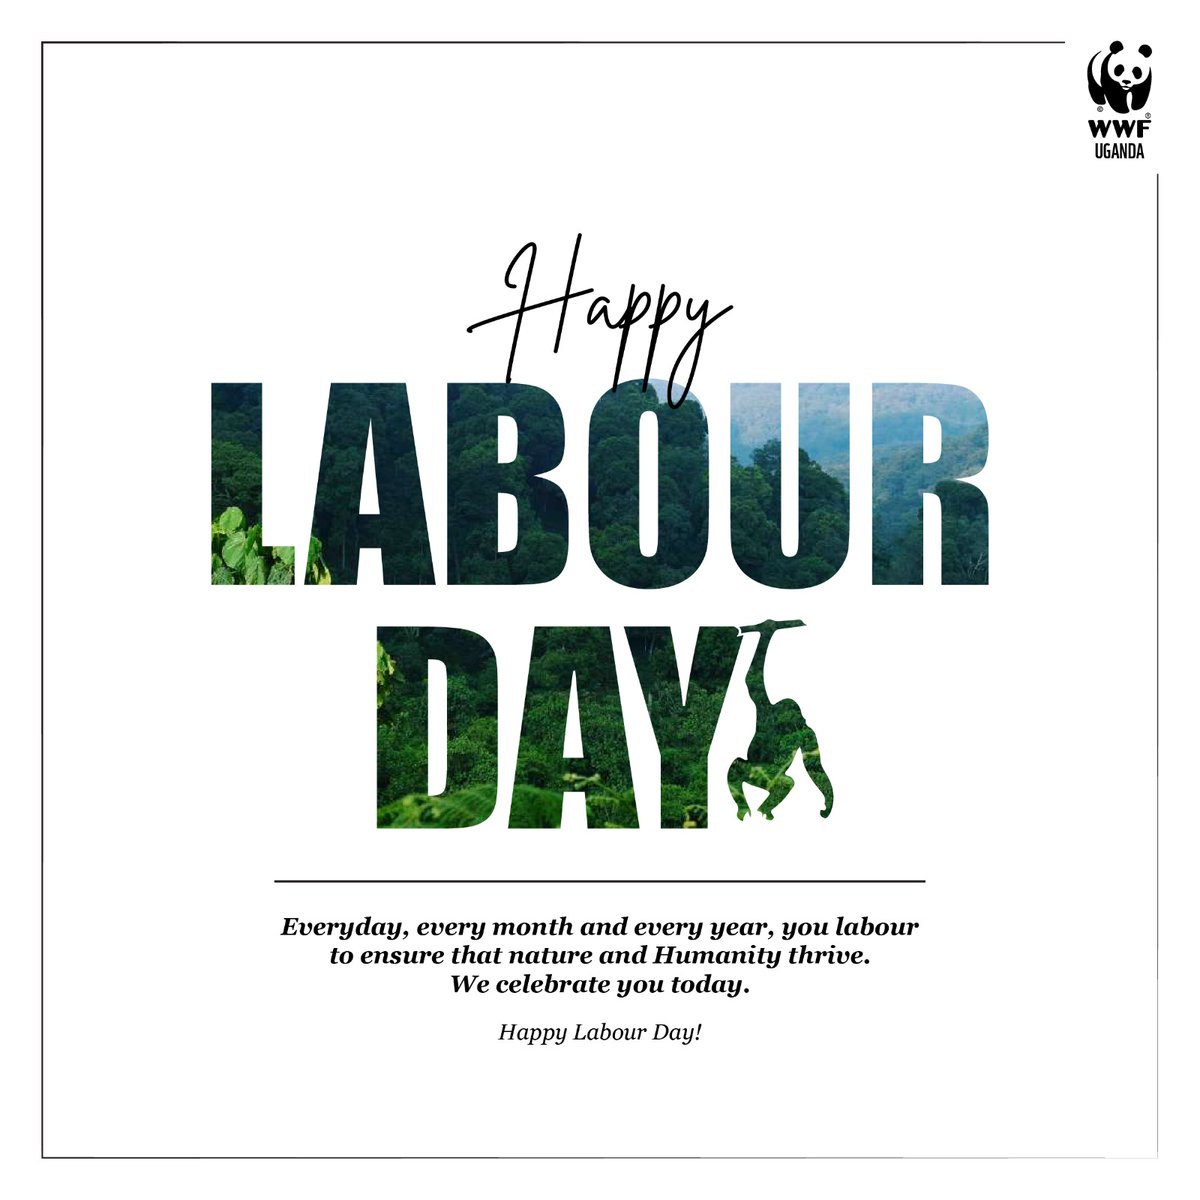 Happy Labor Day from WWF Uganda! We celebrate your hard work and dedication to conservation and sustainable development. May your efforts continue to protect our precious wildlife and natural resources.